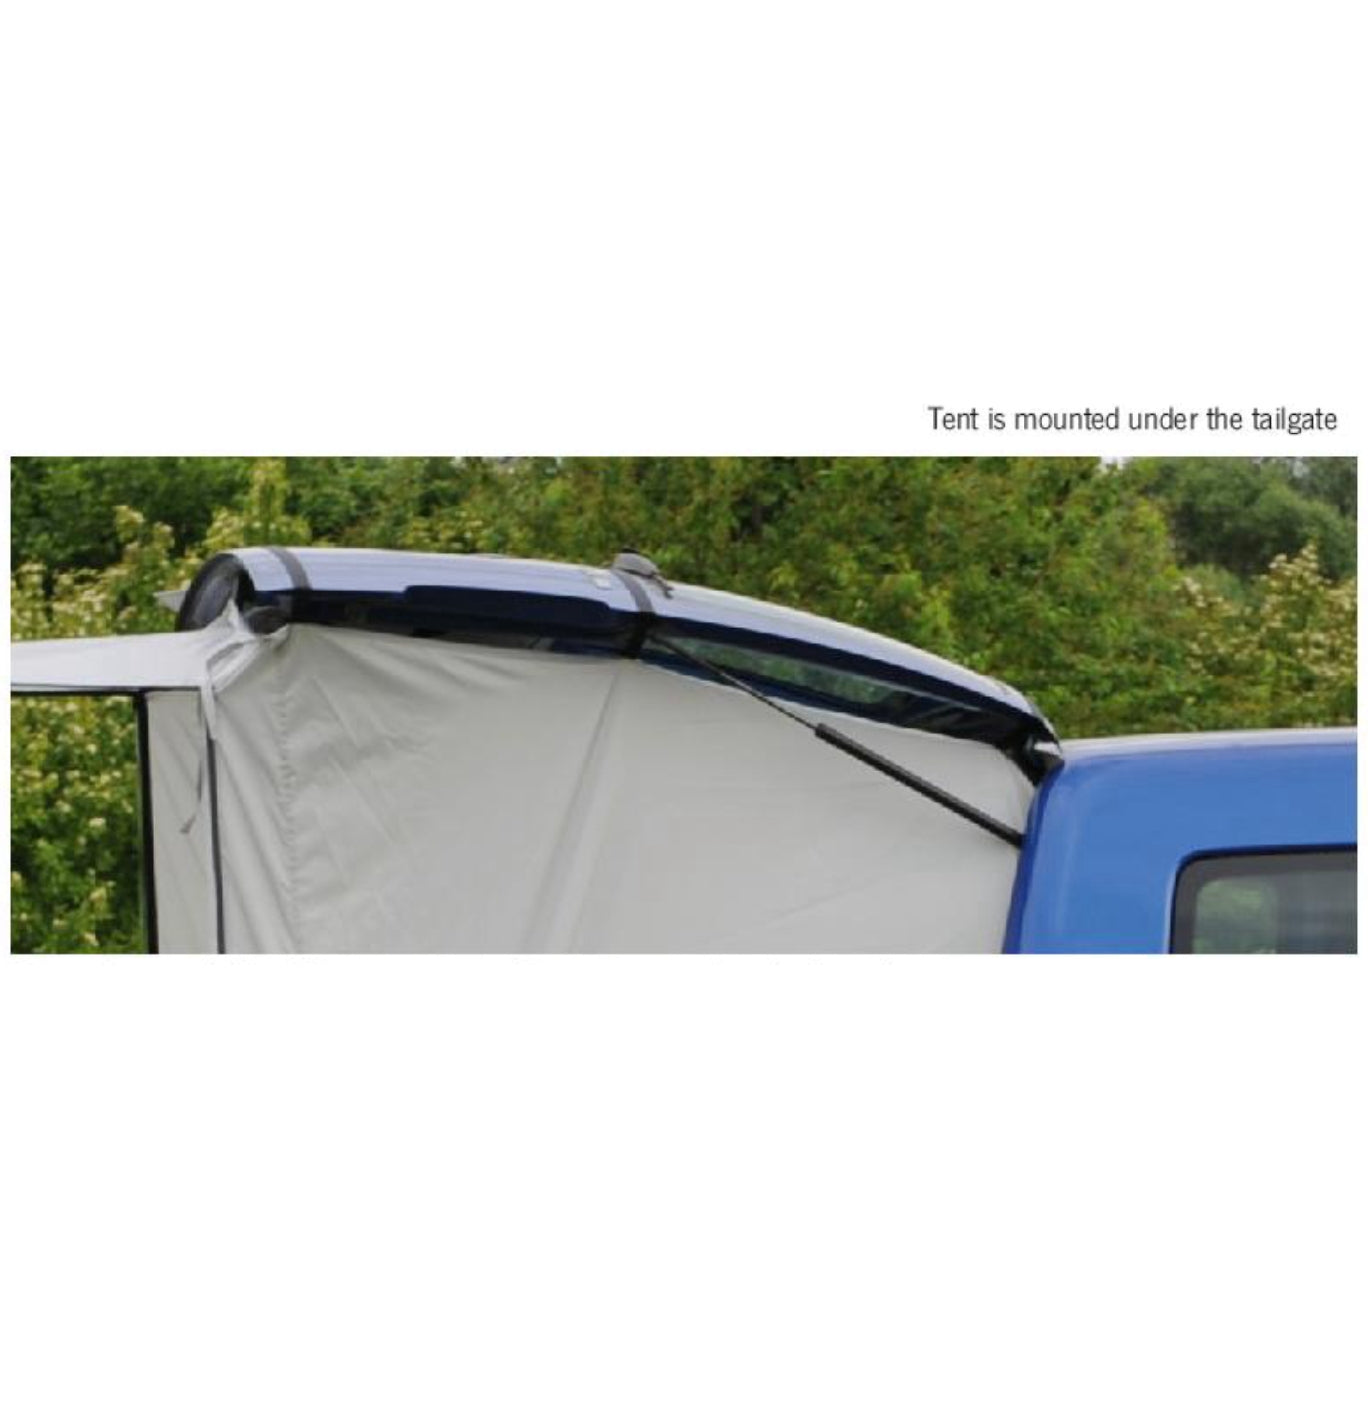 Reimo Vertic Cabin Tailgate Tent & 2 x Door Poles For VW Caddy & Mini Campers